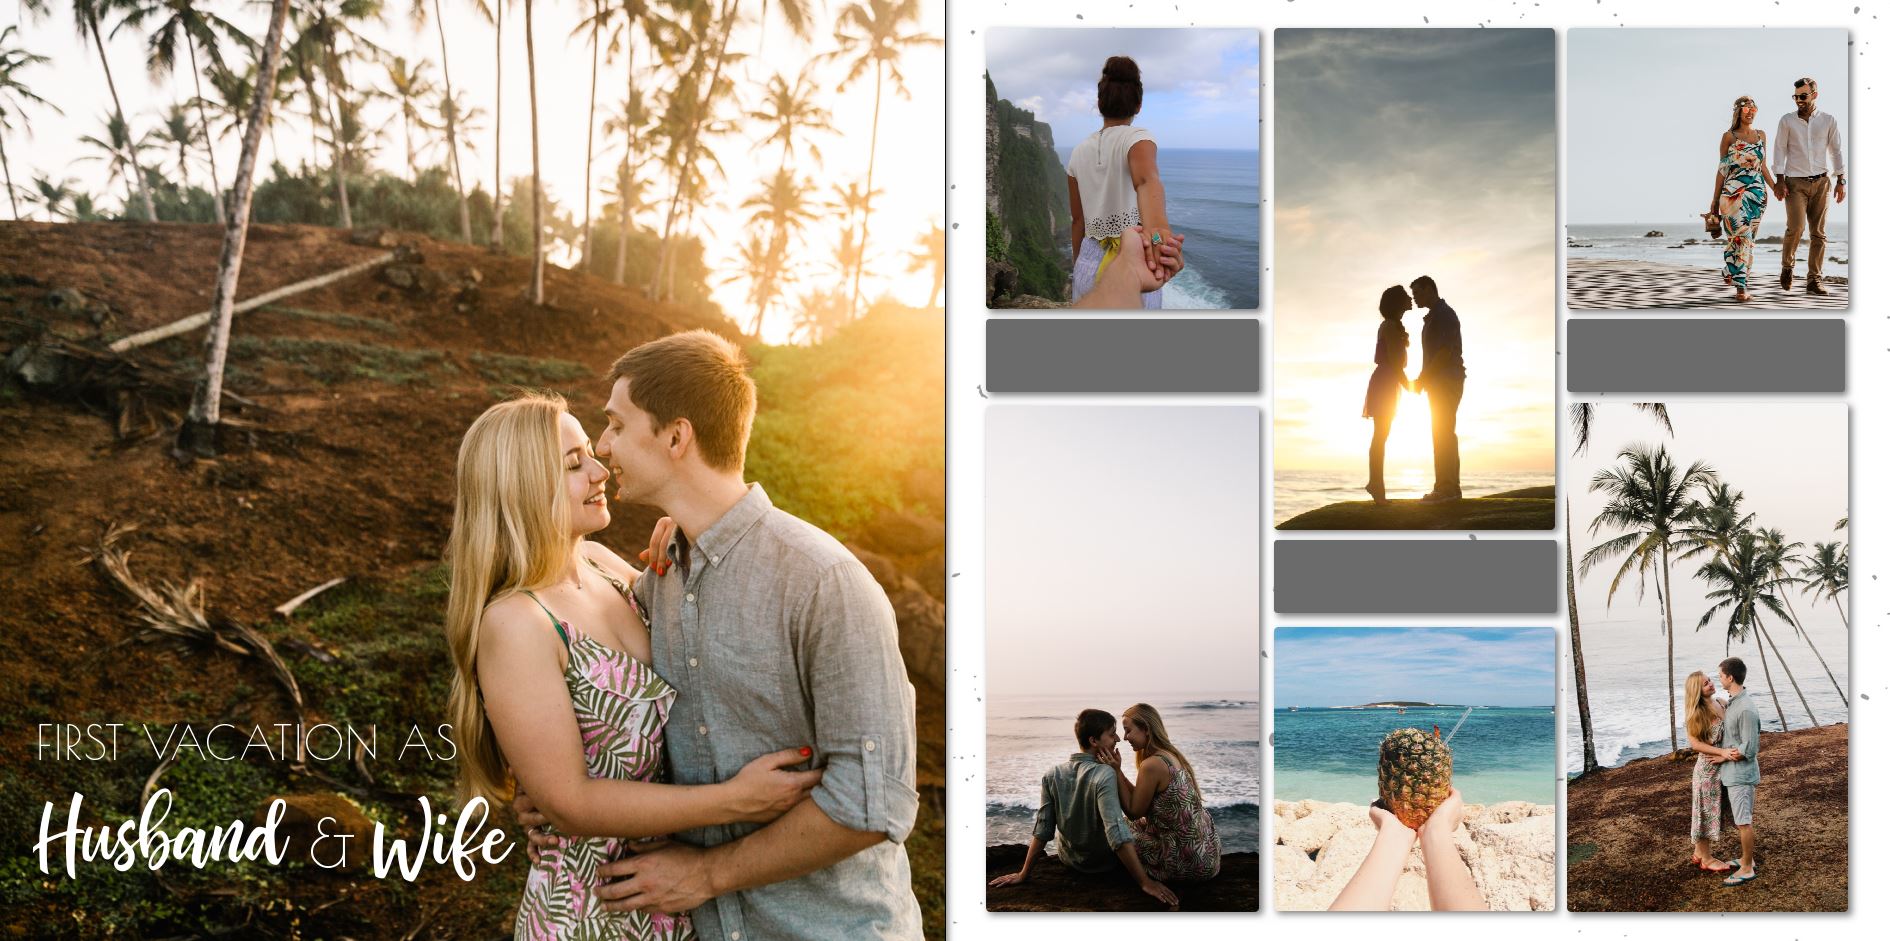 Photo Book - Our Honeymoon square 4-5